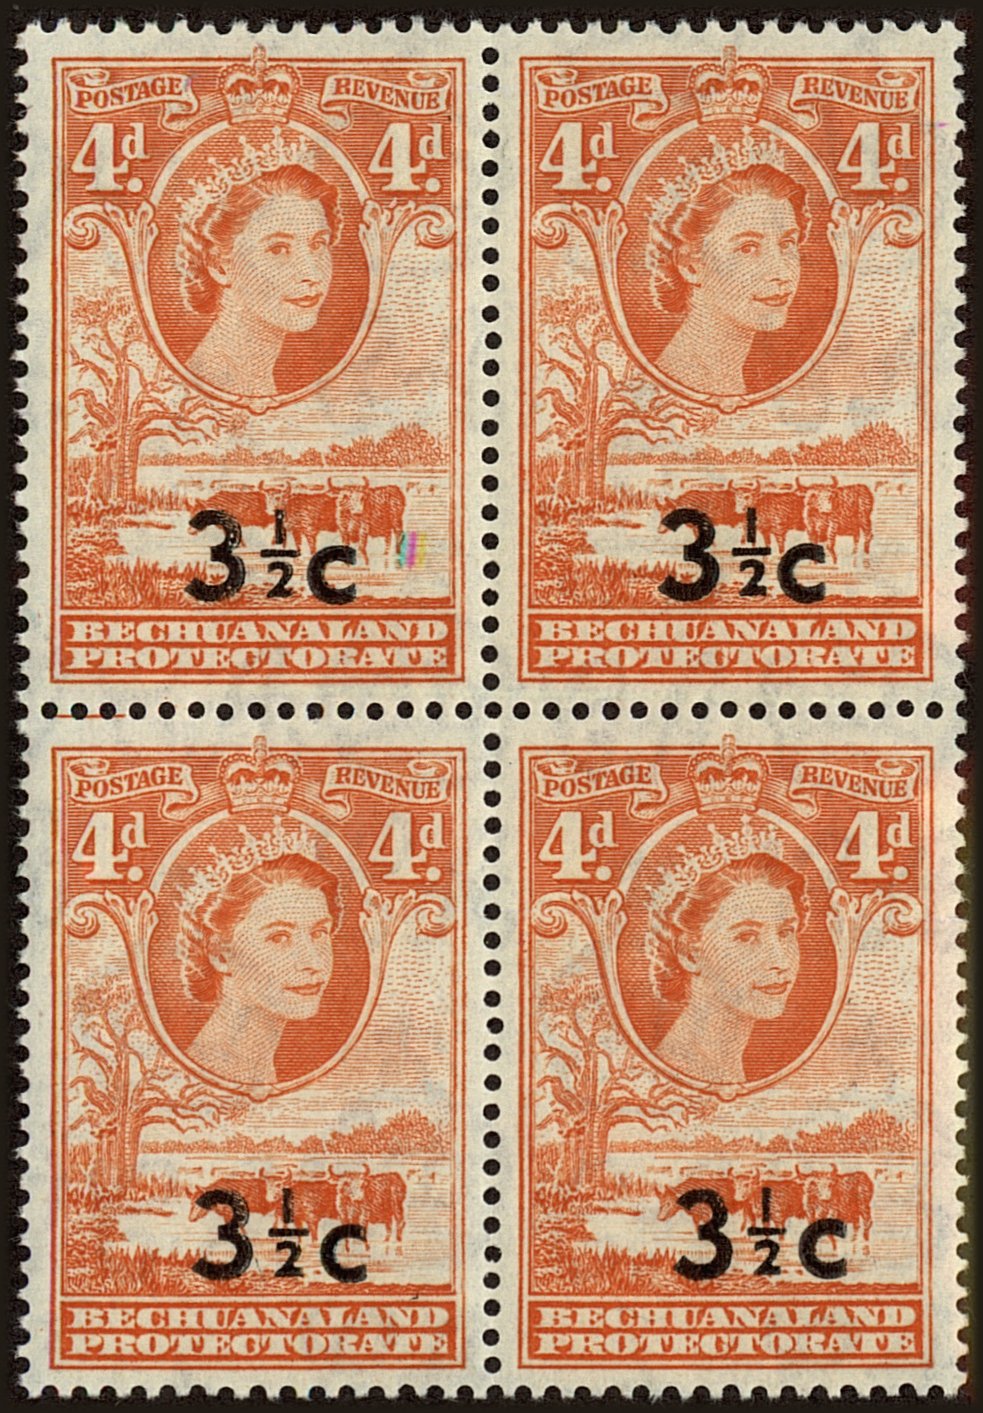 Front view of Bechuanaland Protectorate 173b collectors stamp